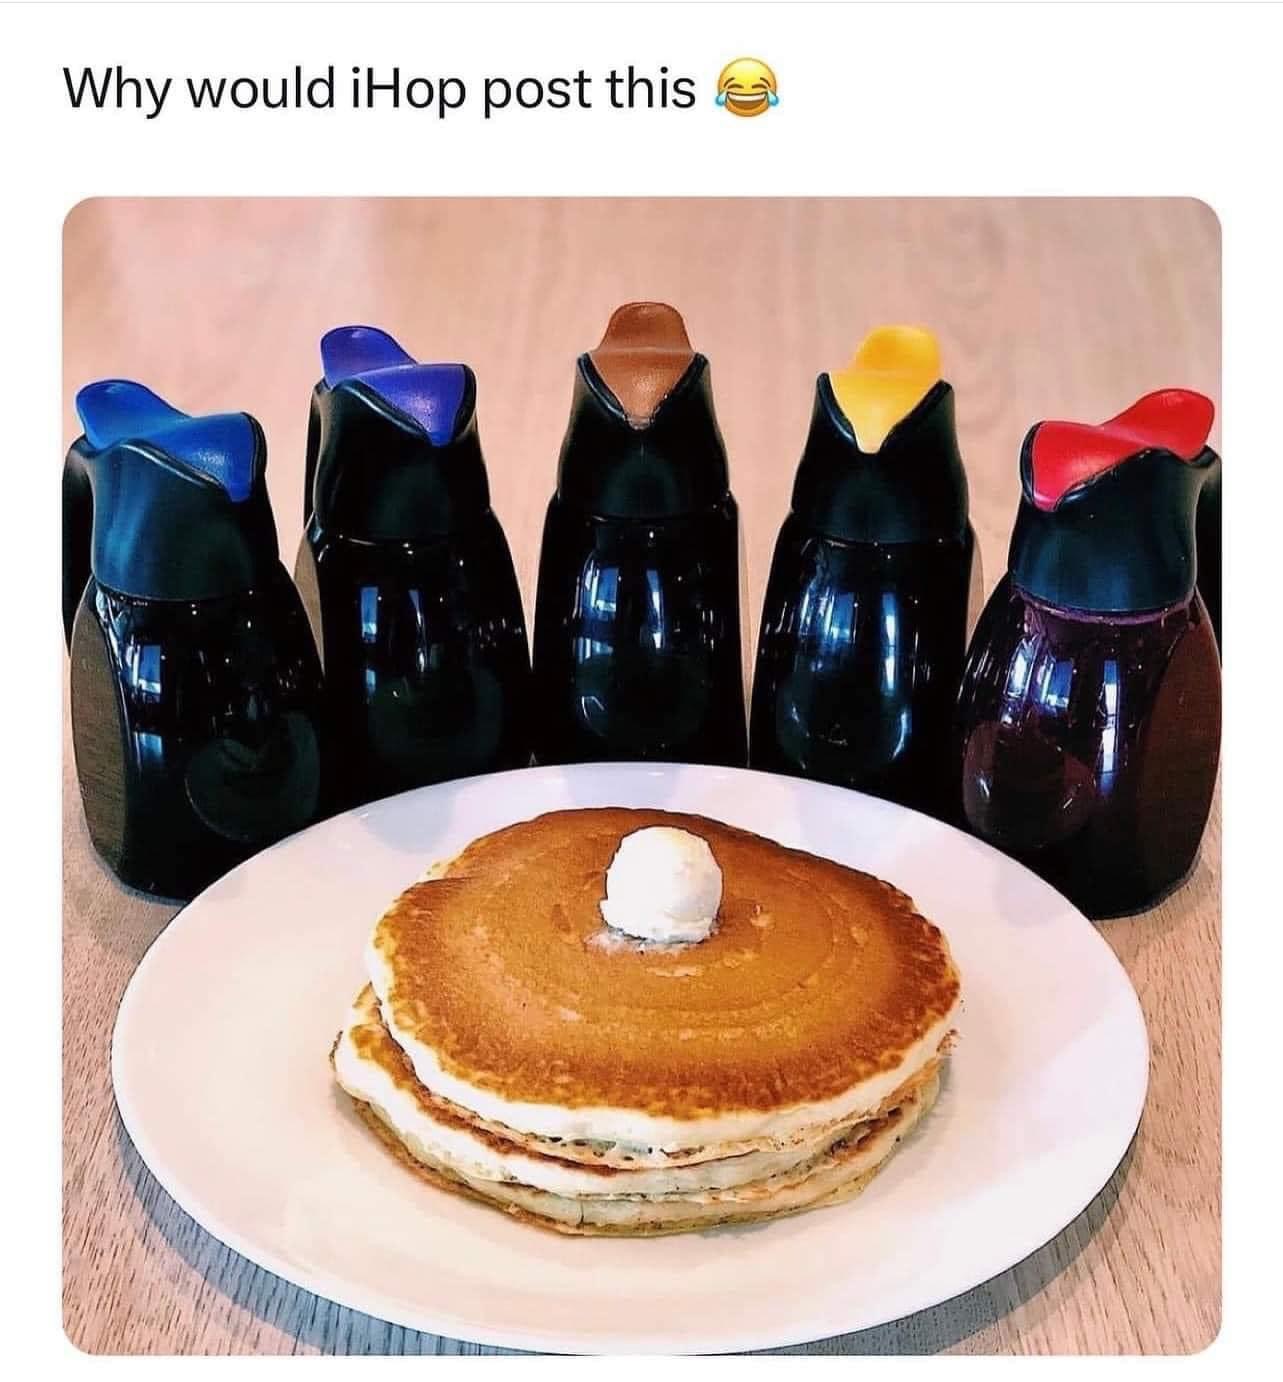 ihop syrup meme - Why would iHop post this